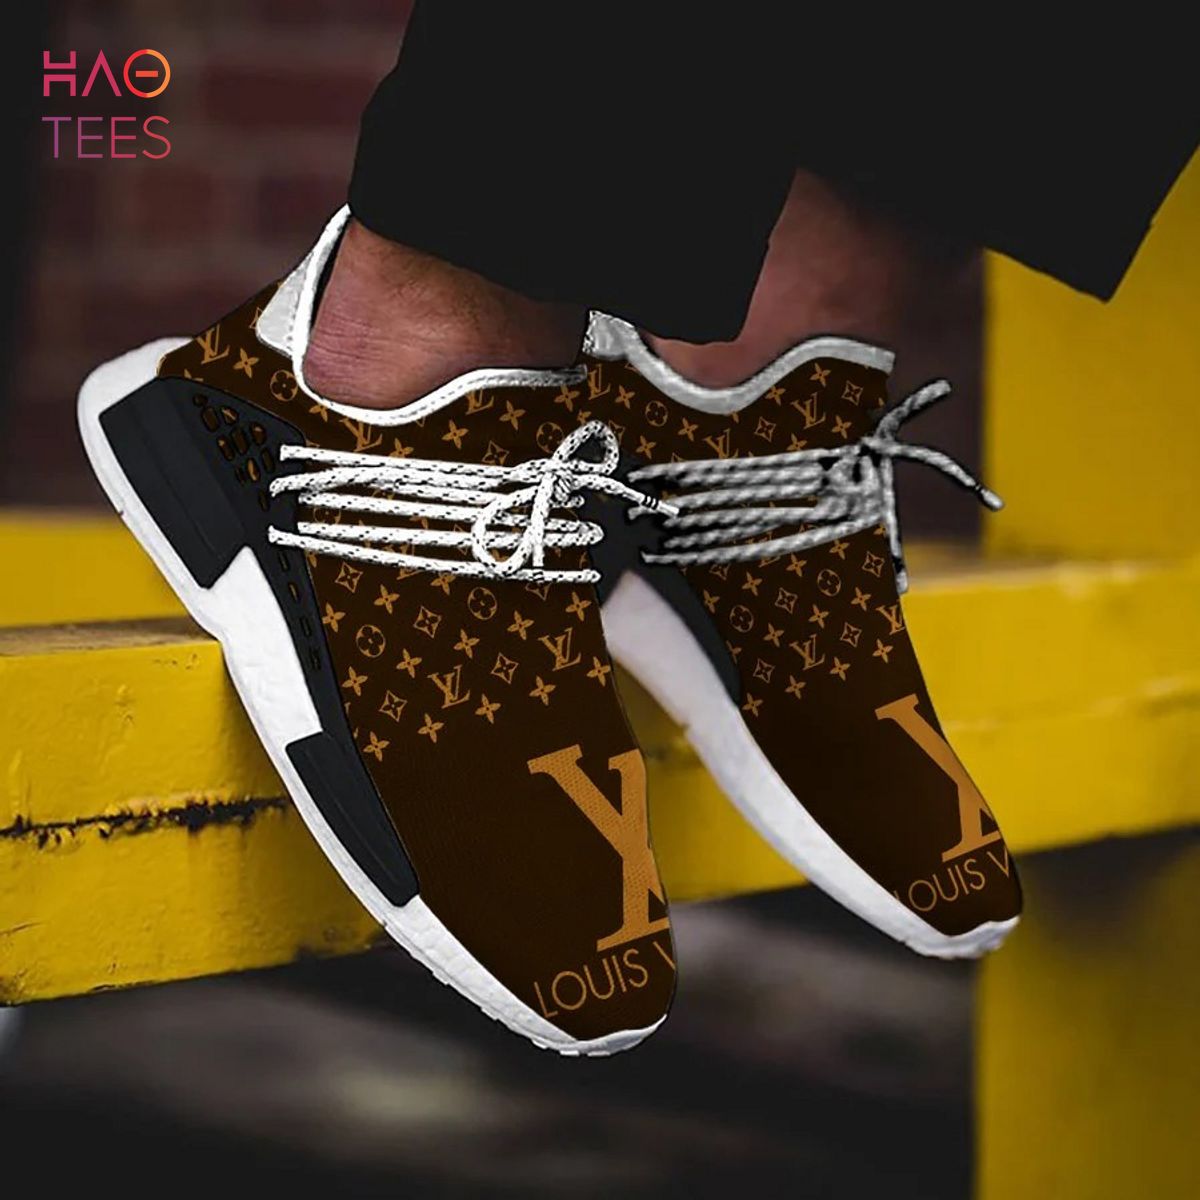 louis vuitton brown nmd human race shoes sneakers 1 Z91Zf